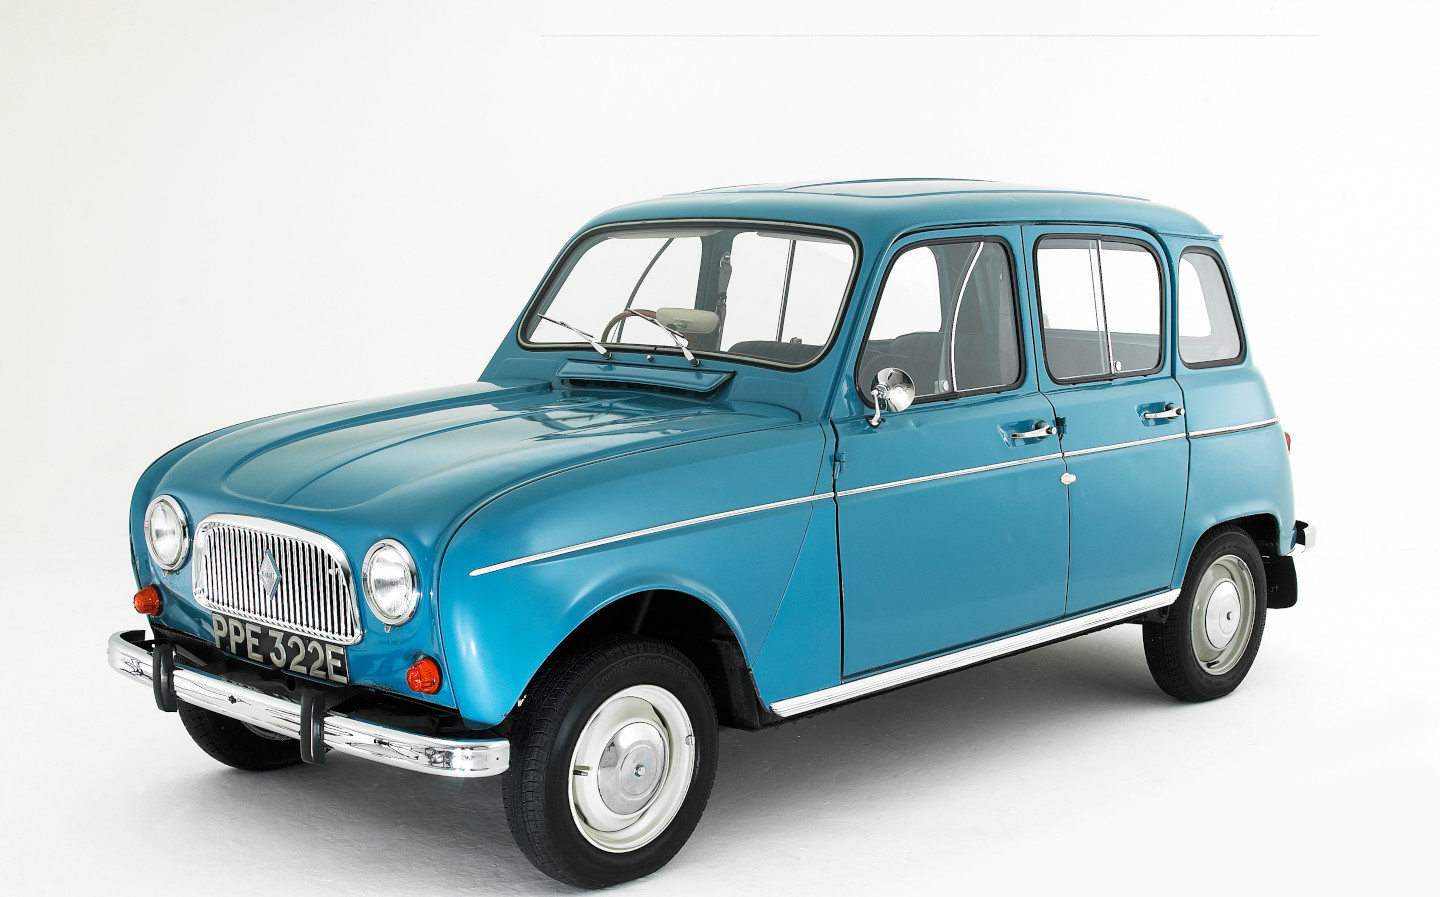 Renault 4 to be reborn as electric city car in 2025